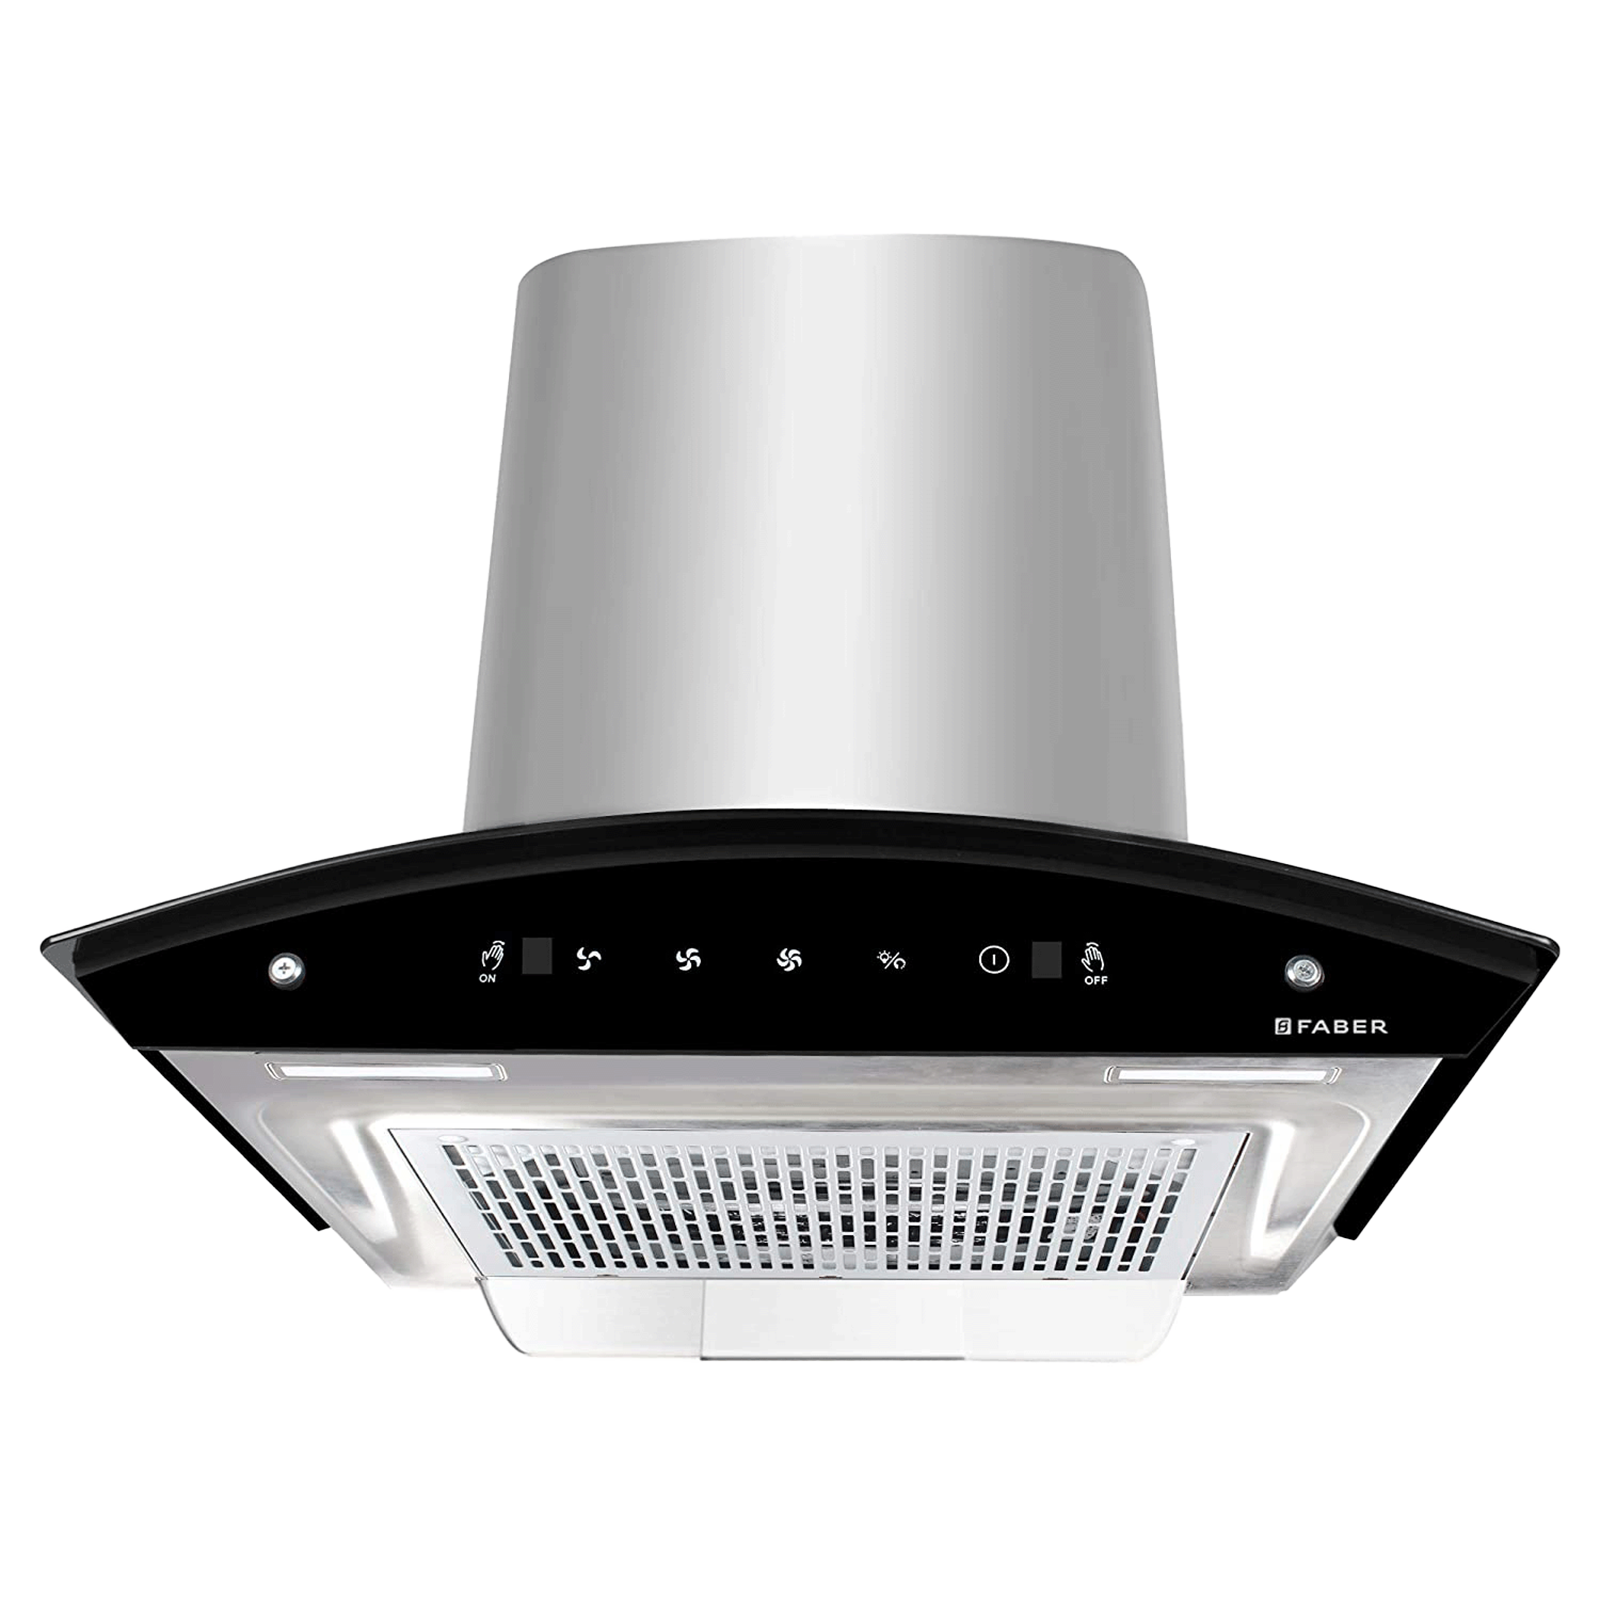 Faber Hood Orient Xpress HC SC SS 60 1200m³/hr 60 cm Filterless Chimney (325.0638.043, Black and Stainless Steel)_1